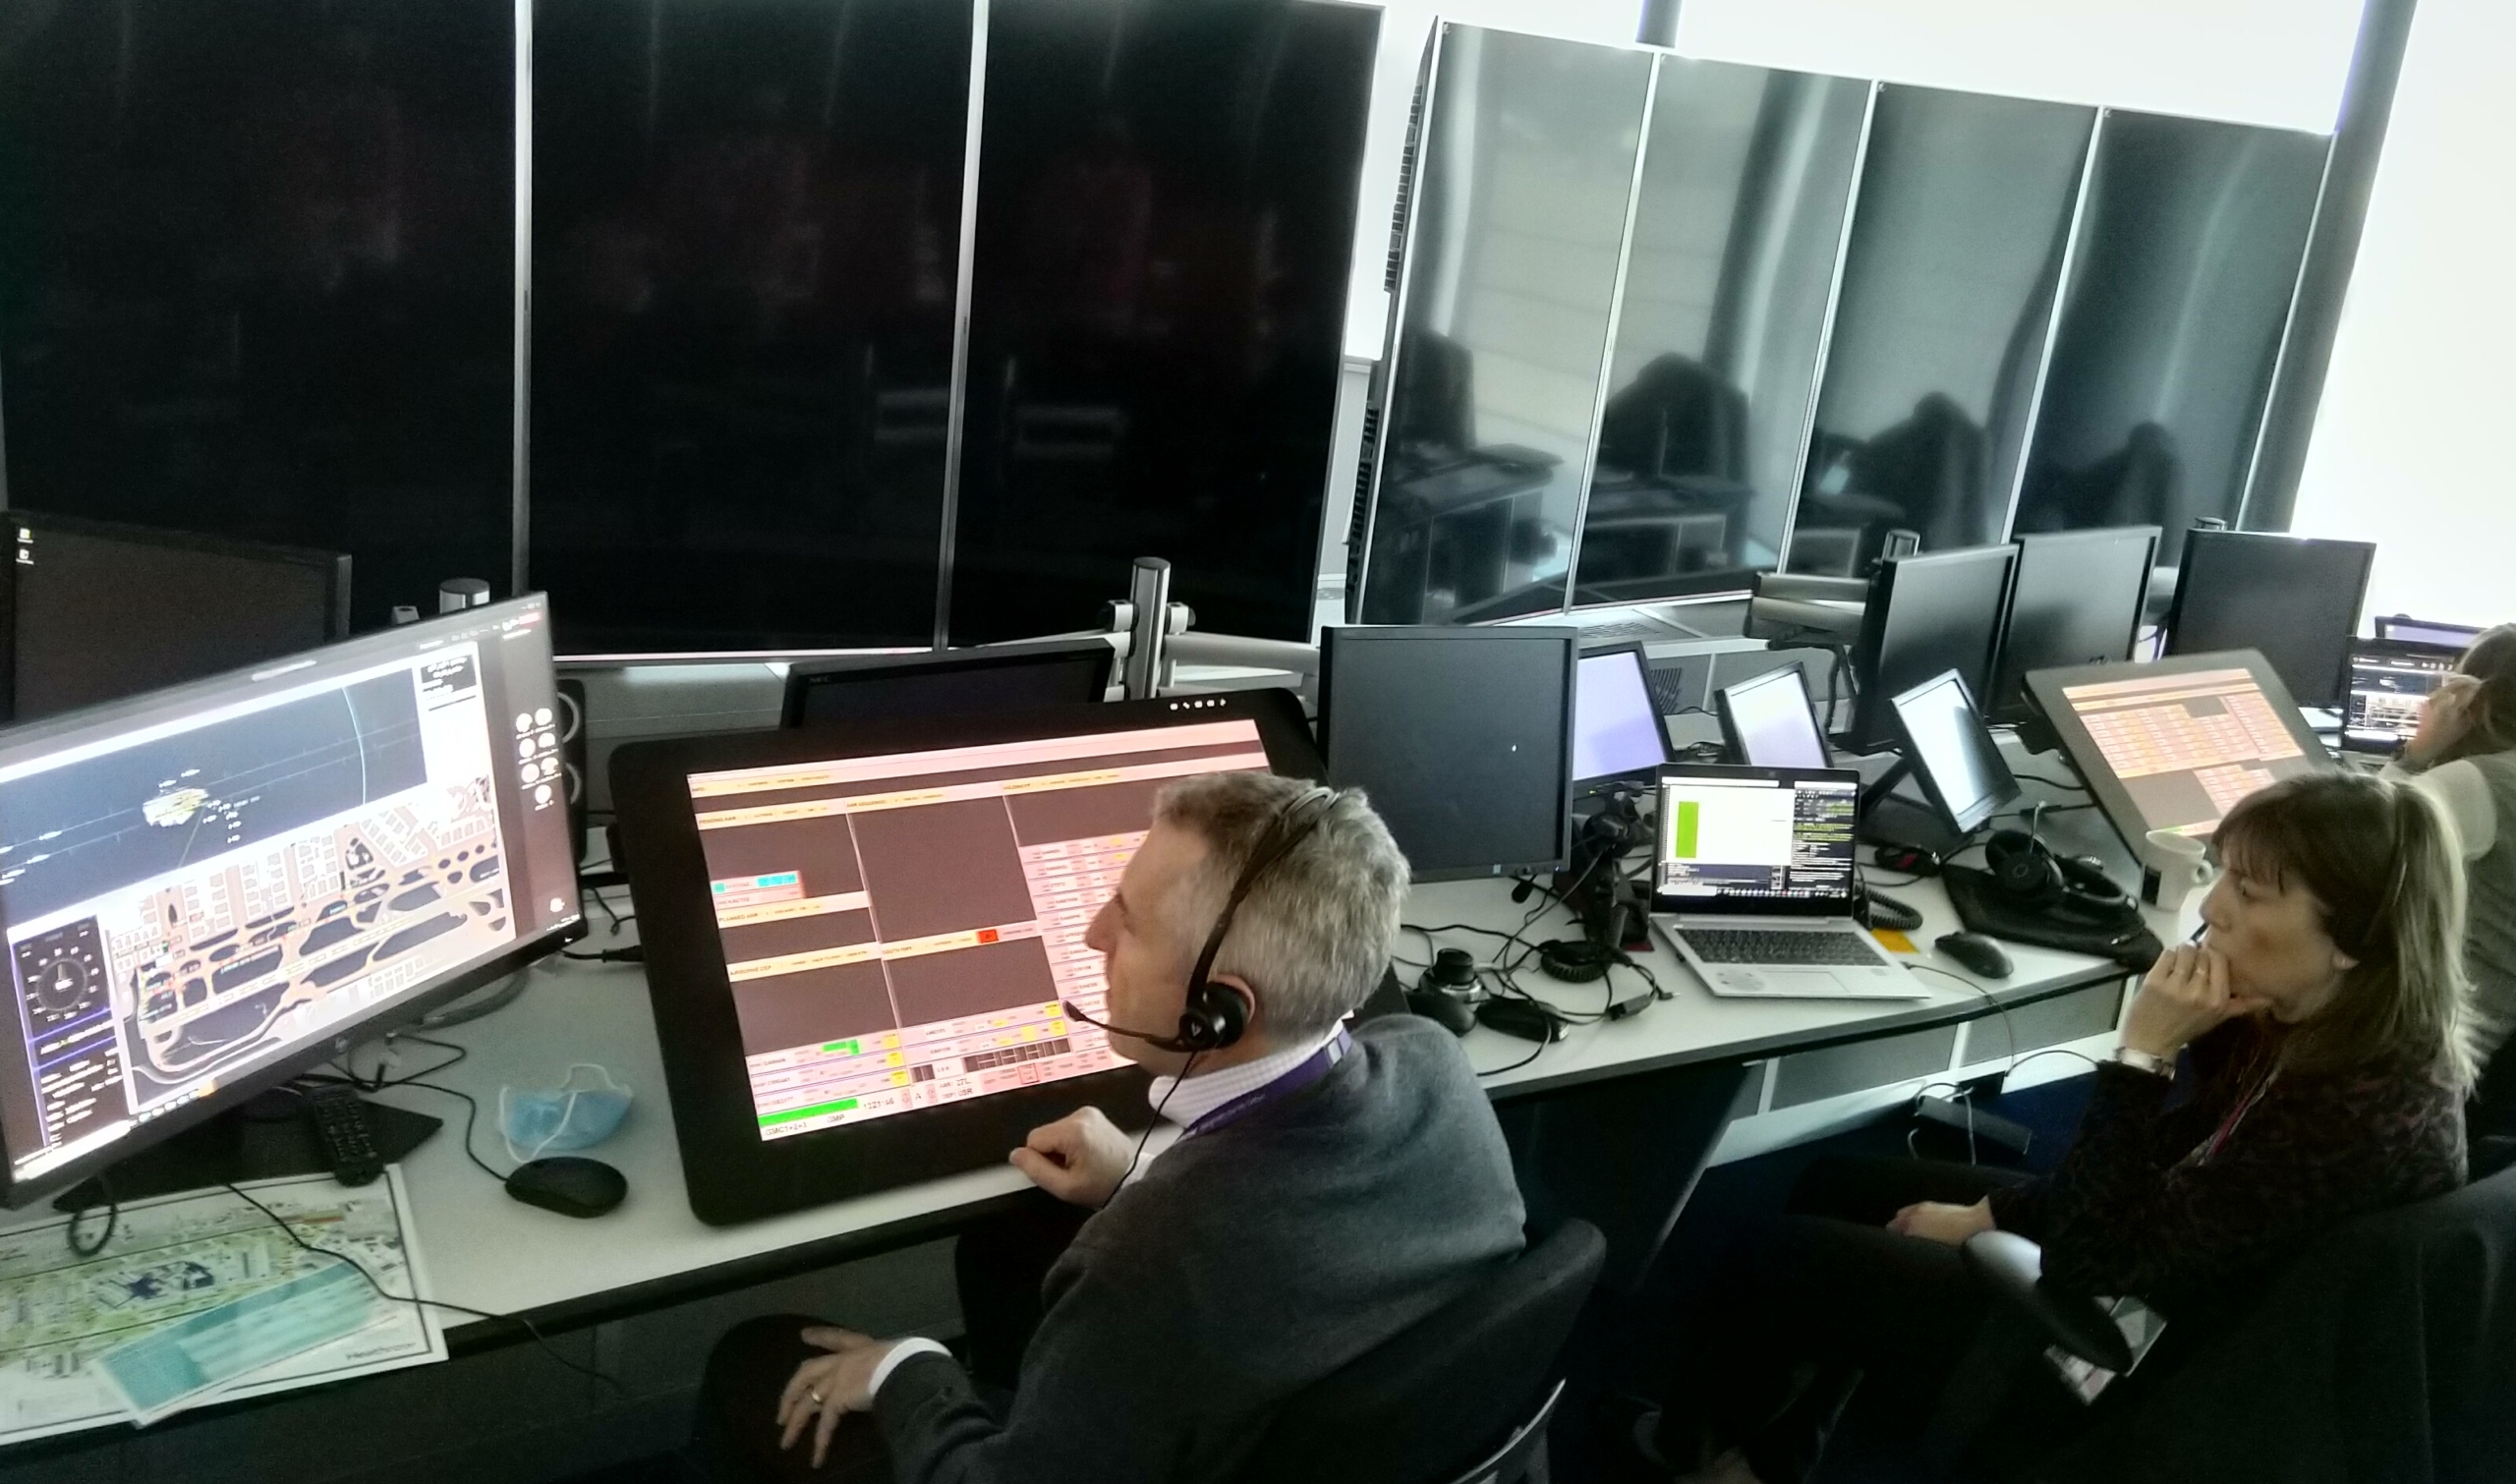 Dynamic separation simulation exercise at Heathrow Airport air traffic control tower